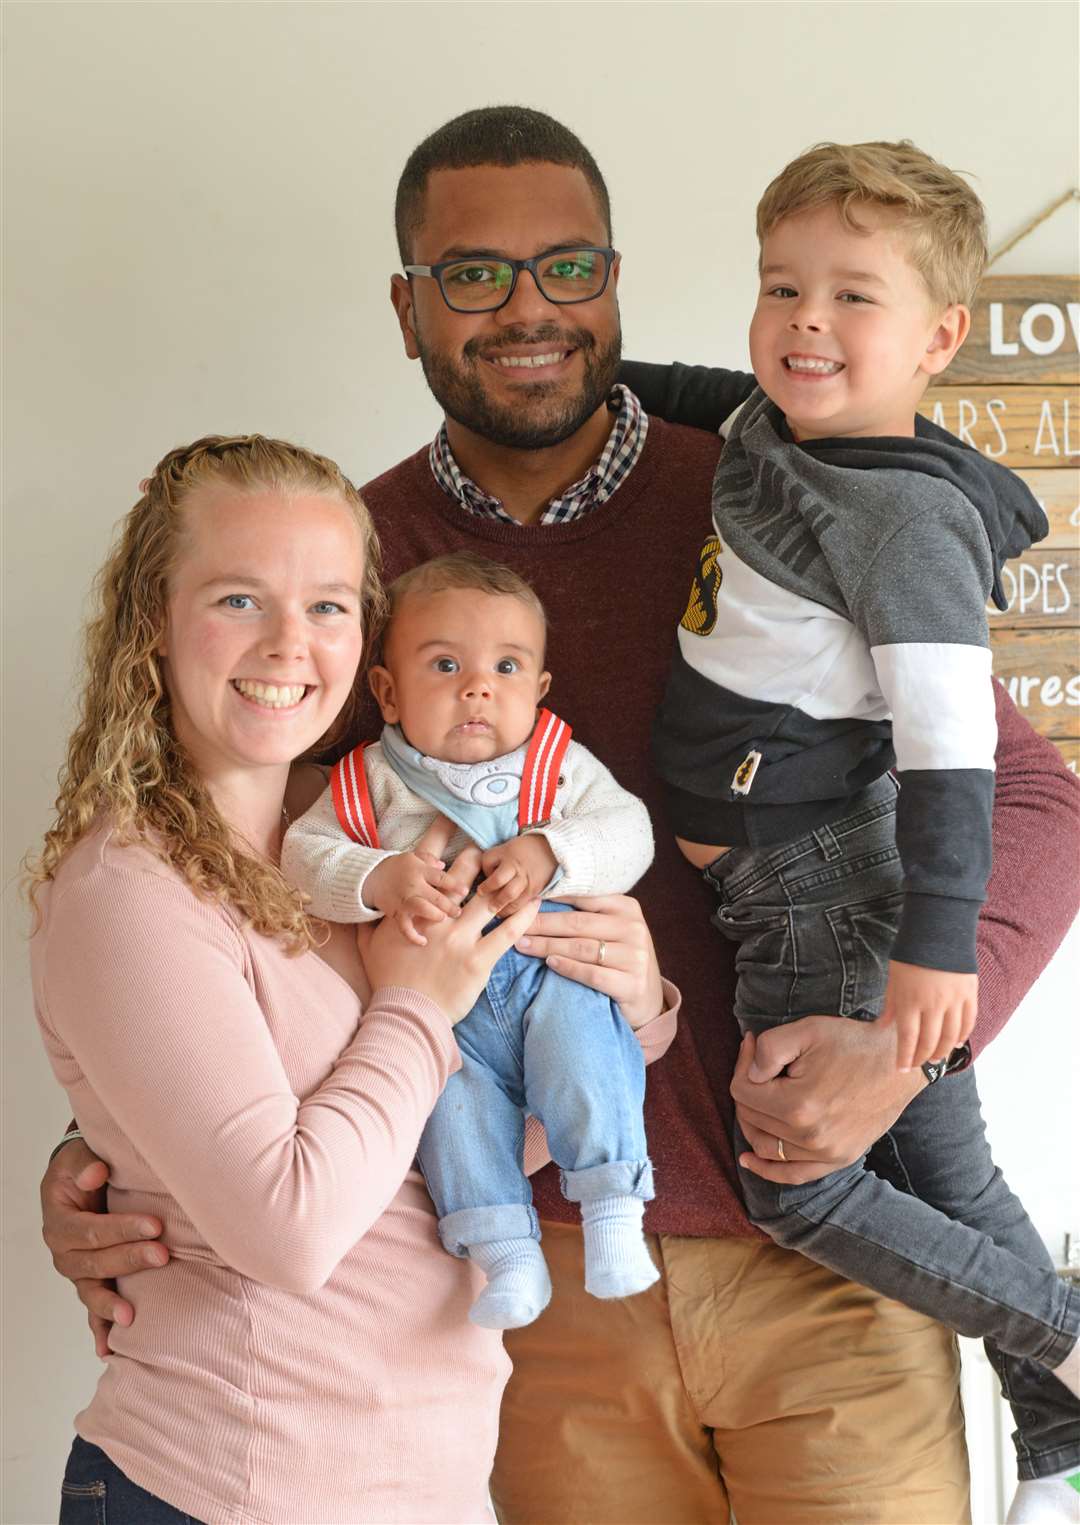 West Essex Maternity Voices Partnership co-chair Chloe Ribeiro with husband Thiago and children Mateo, 3, and four-month-old Malakai. Pic: Vikki Lince (47247959)